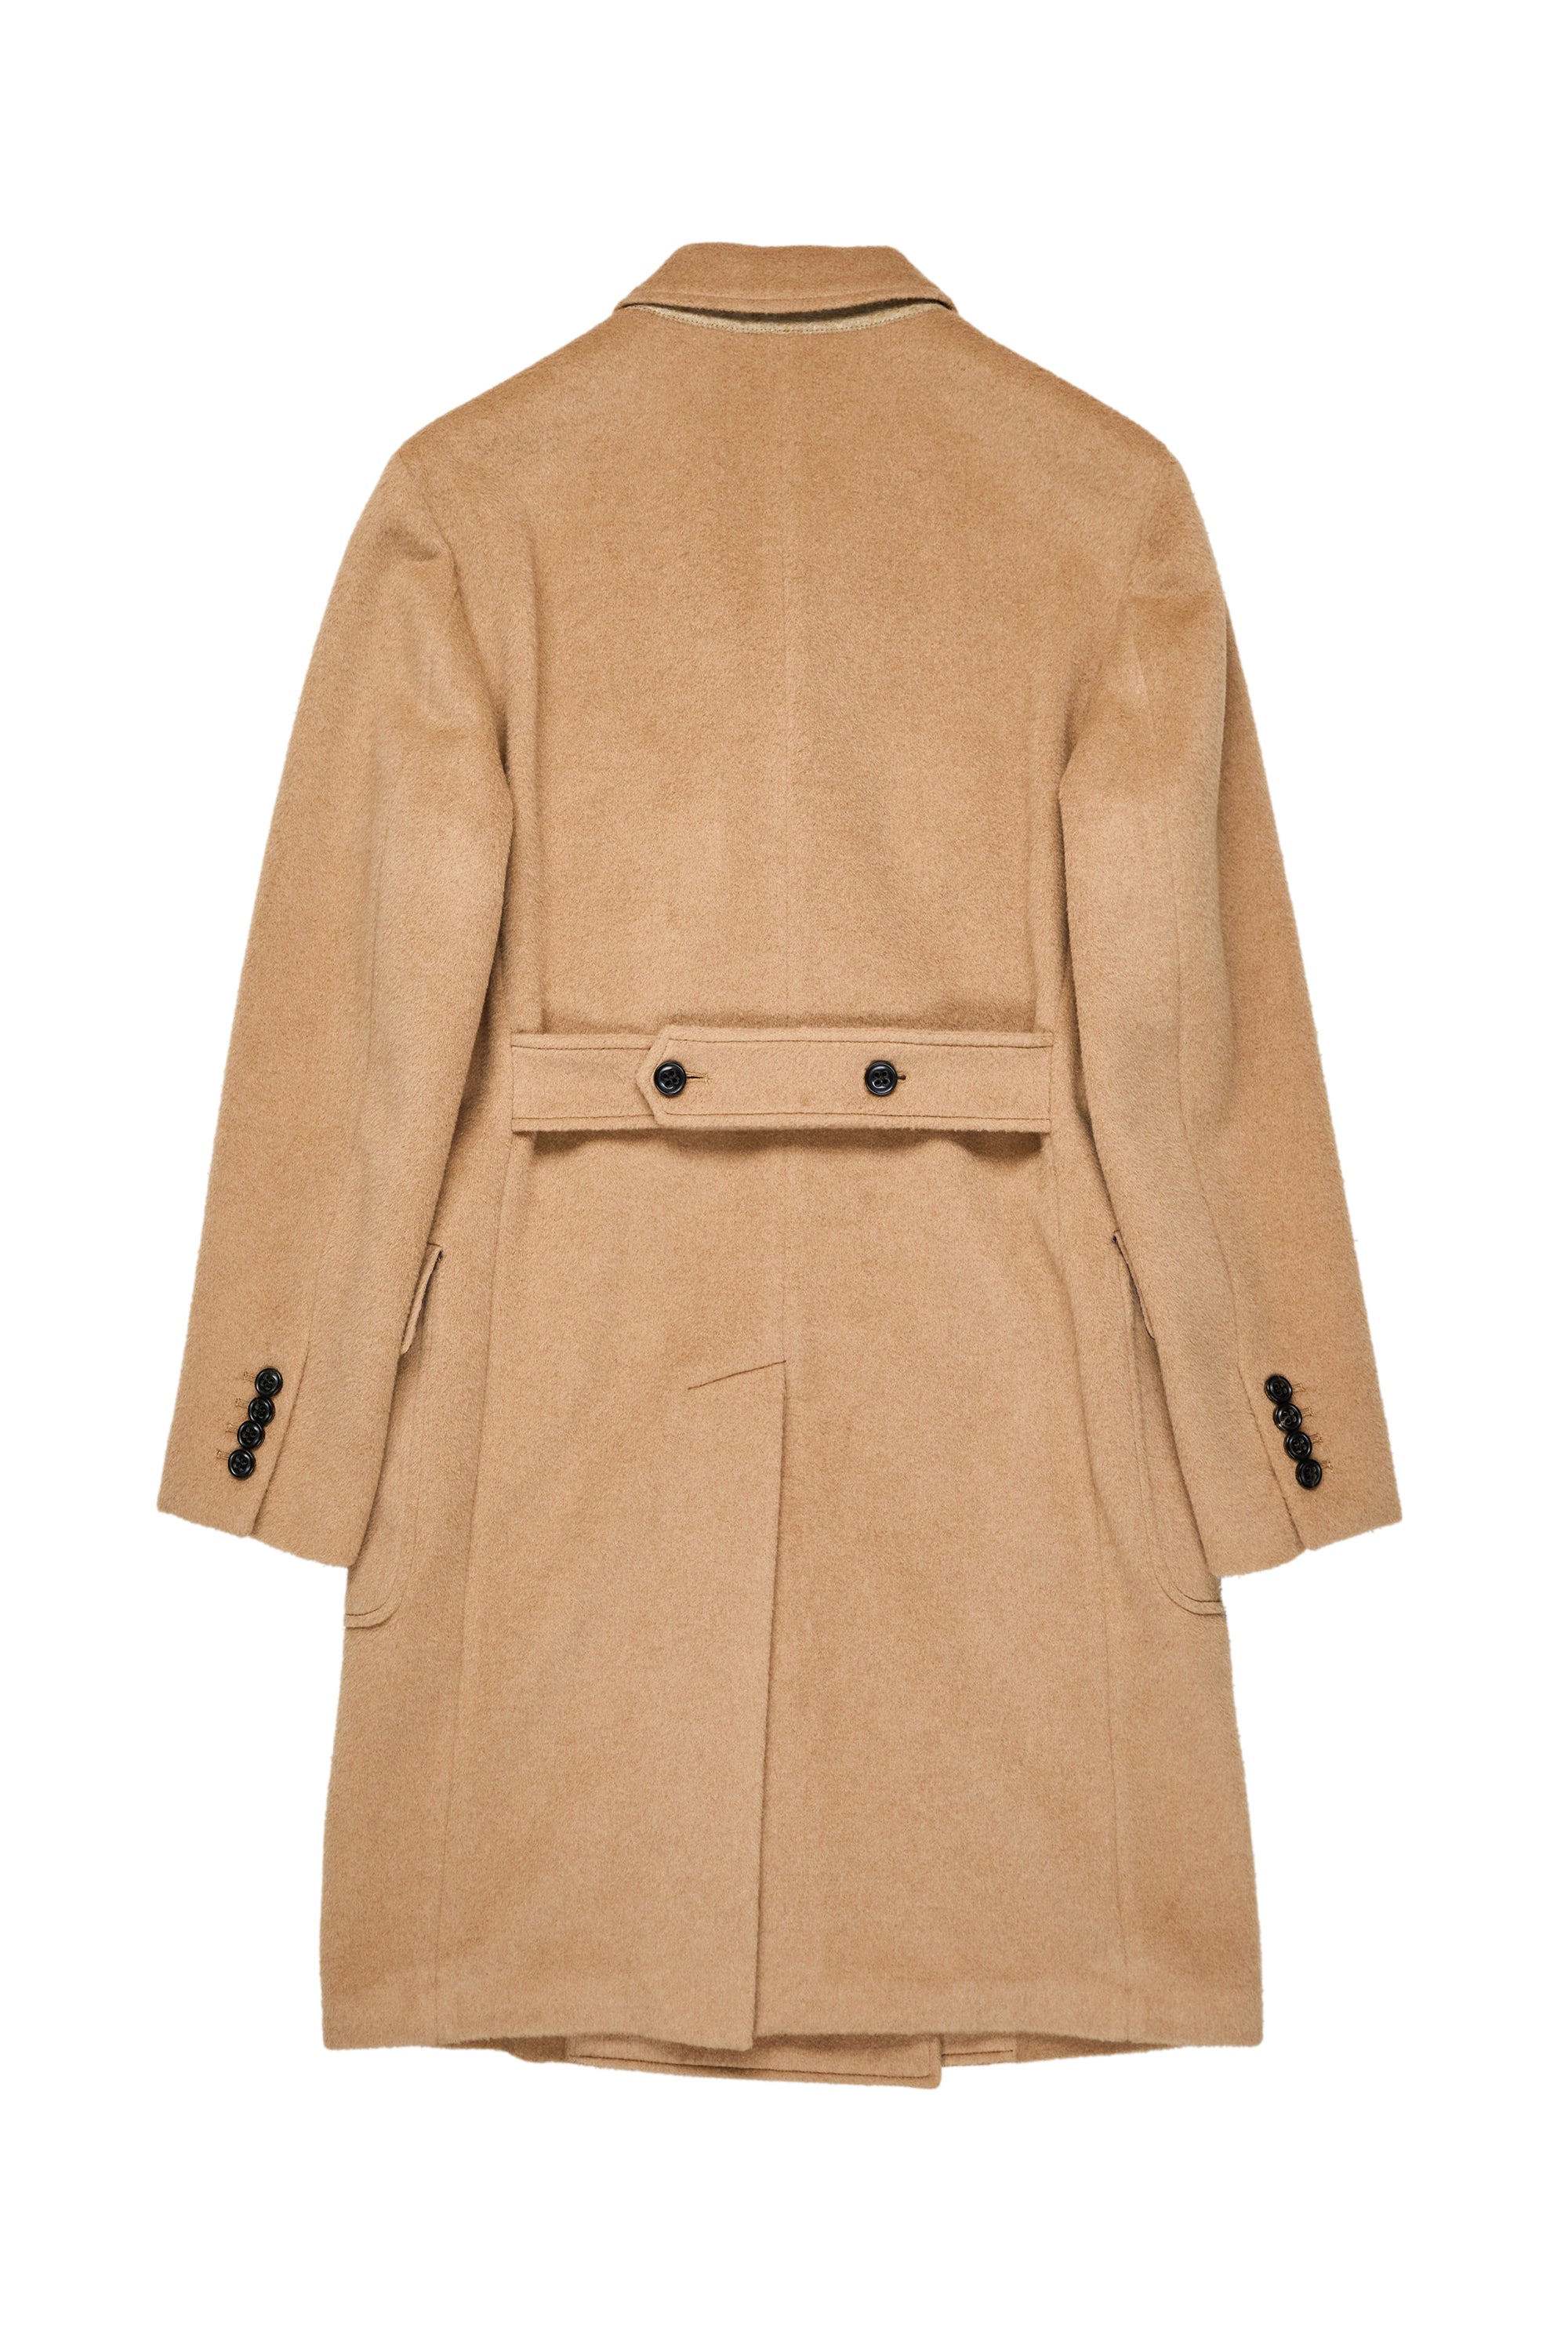 Drumohr Sabbia Double Breasted Camel Overcoat